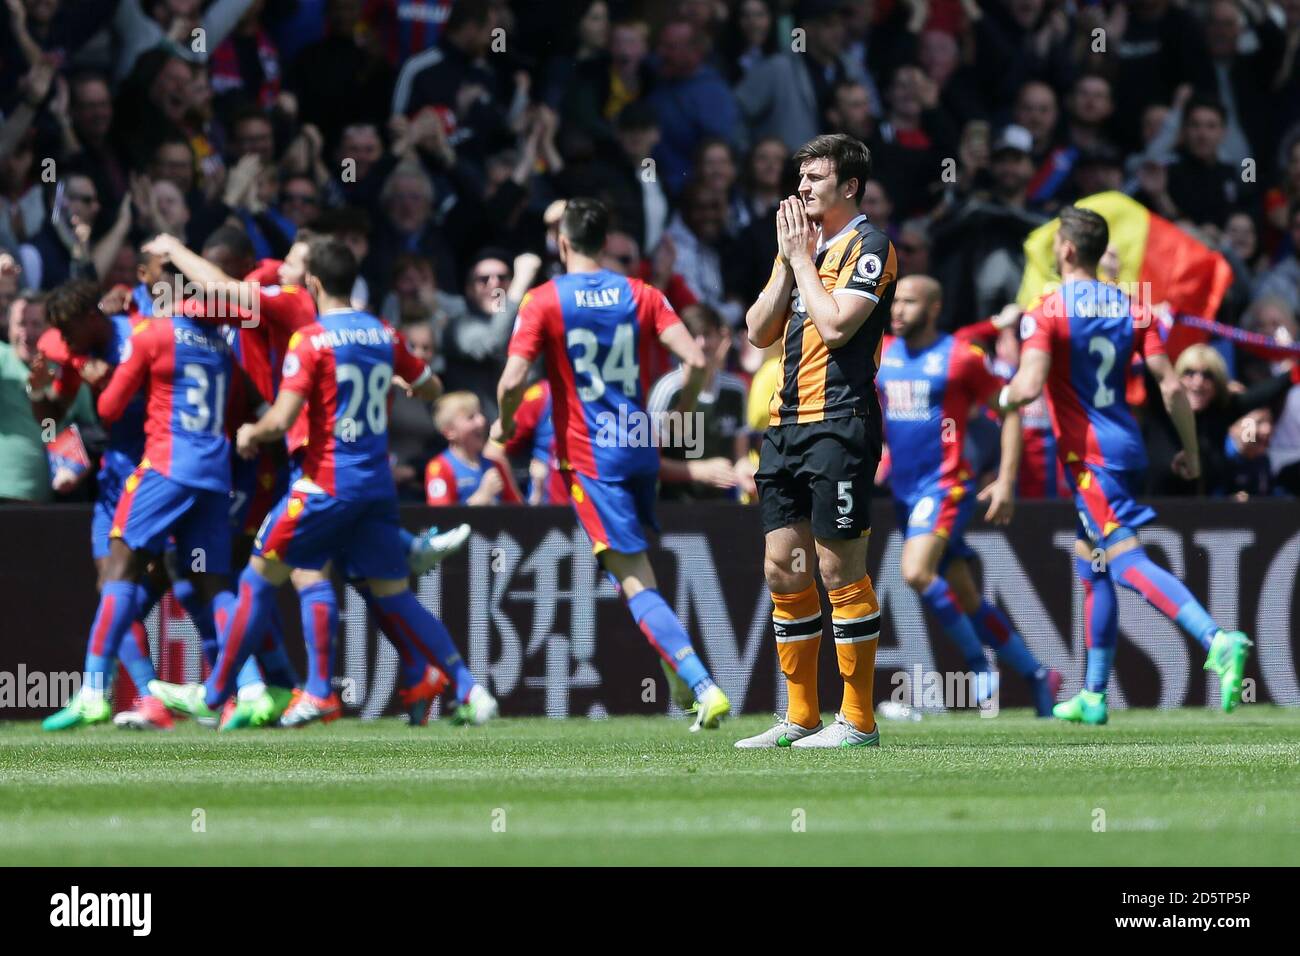 Hullâ€™s Harry Maguire looks dejected after Crystal Palaceâ€™s Wilfried Zaha scored a goal Stock Photo